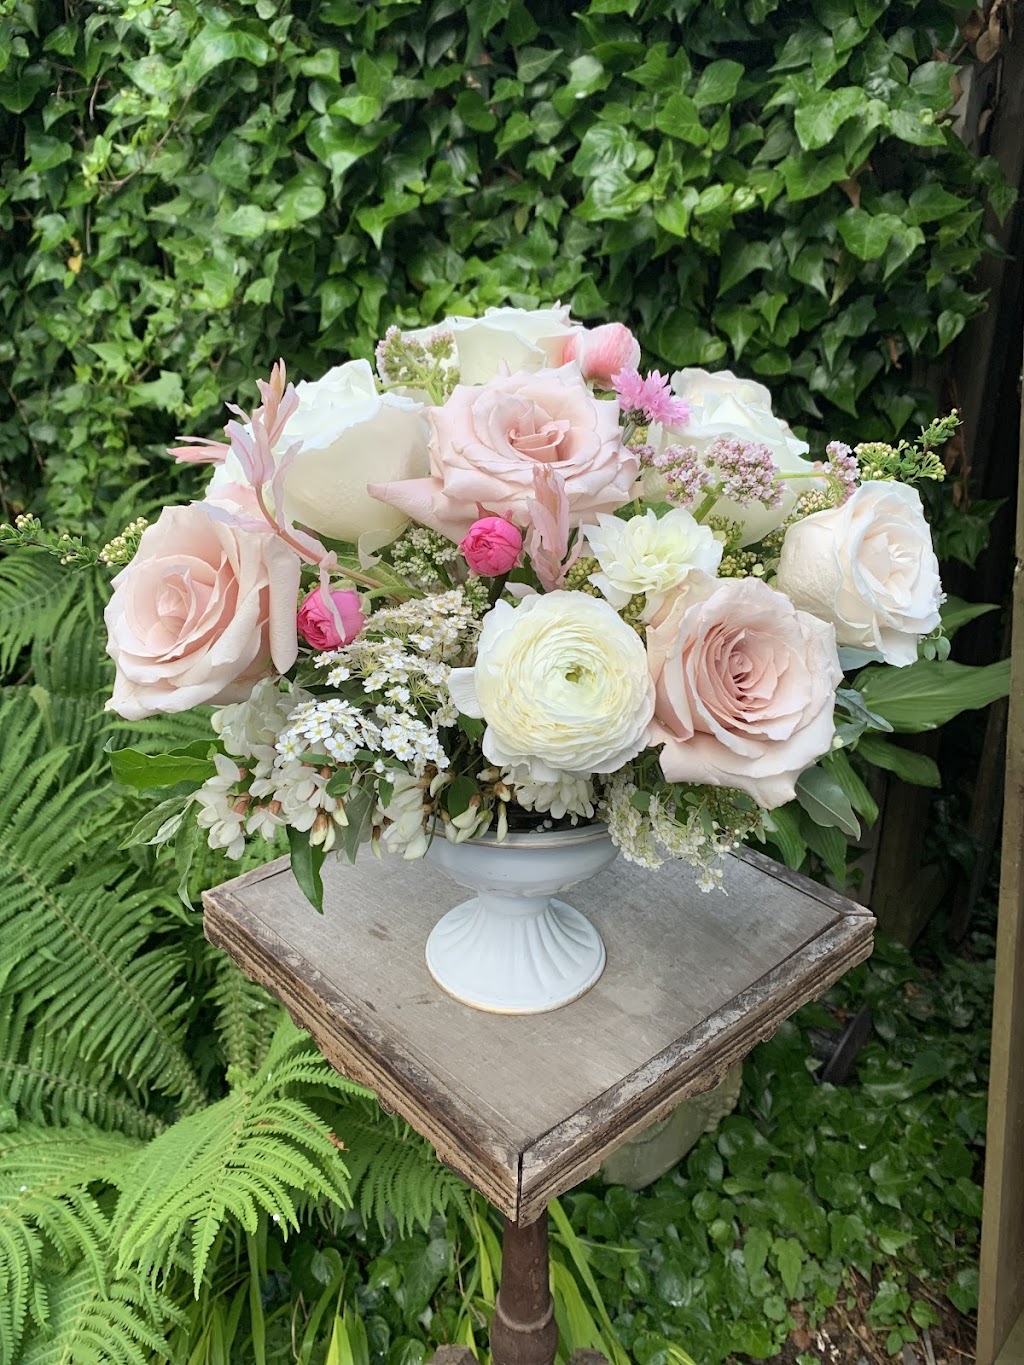 Nerdling Acres Flower Stand | 7755 Main Bayview Rd, Southold, NY 11971 | Phone: (631) 379-0854